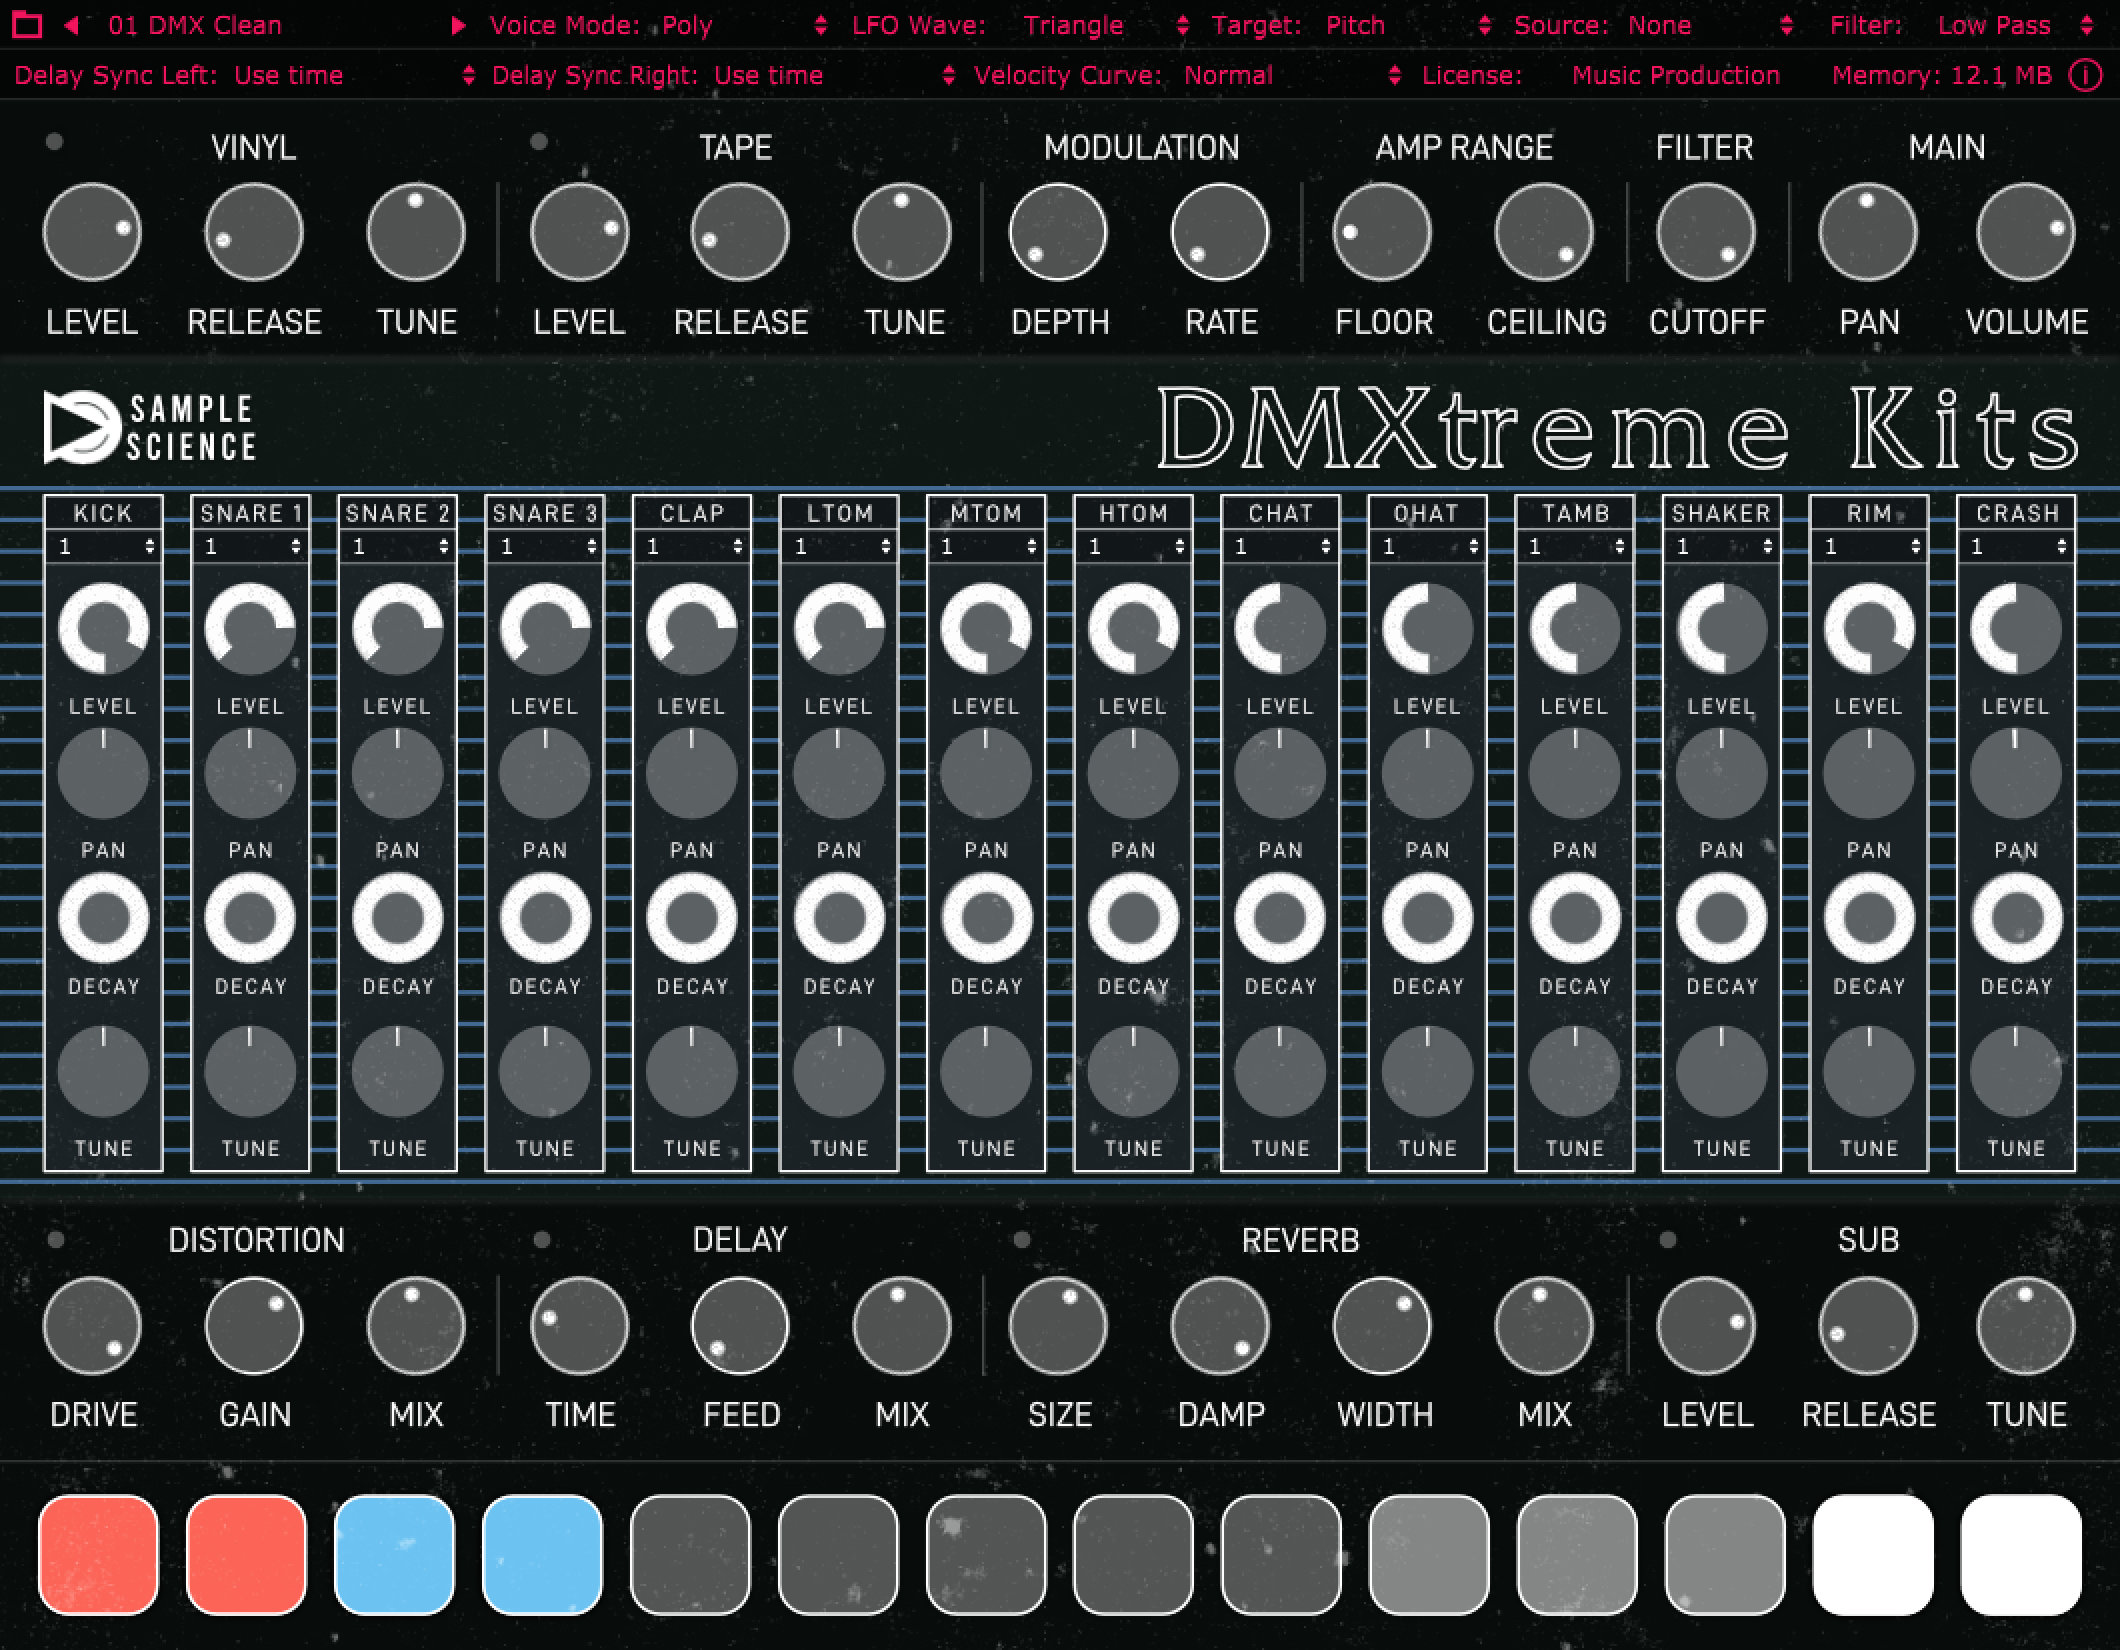 SampleScience releases DMXtreme Kits based on the DMX drum machine from the 80s